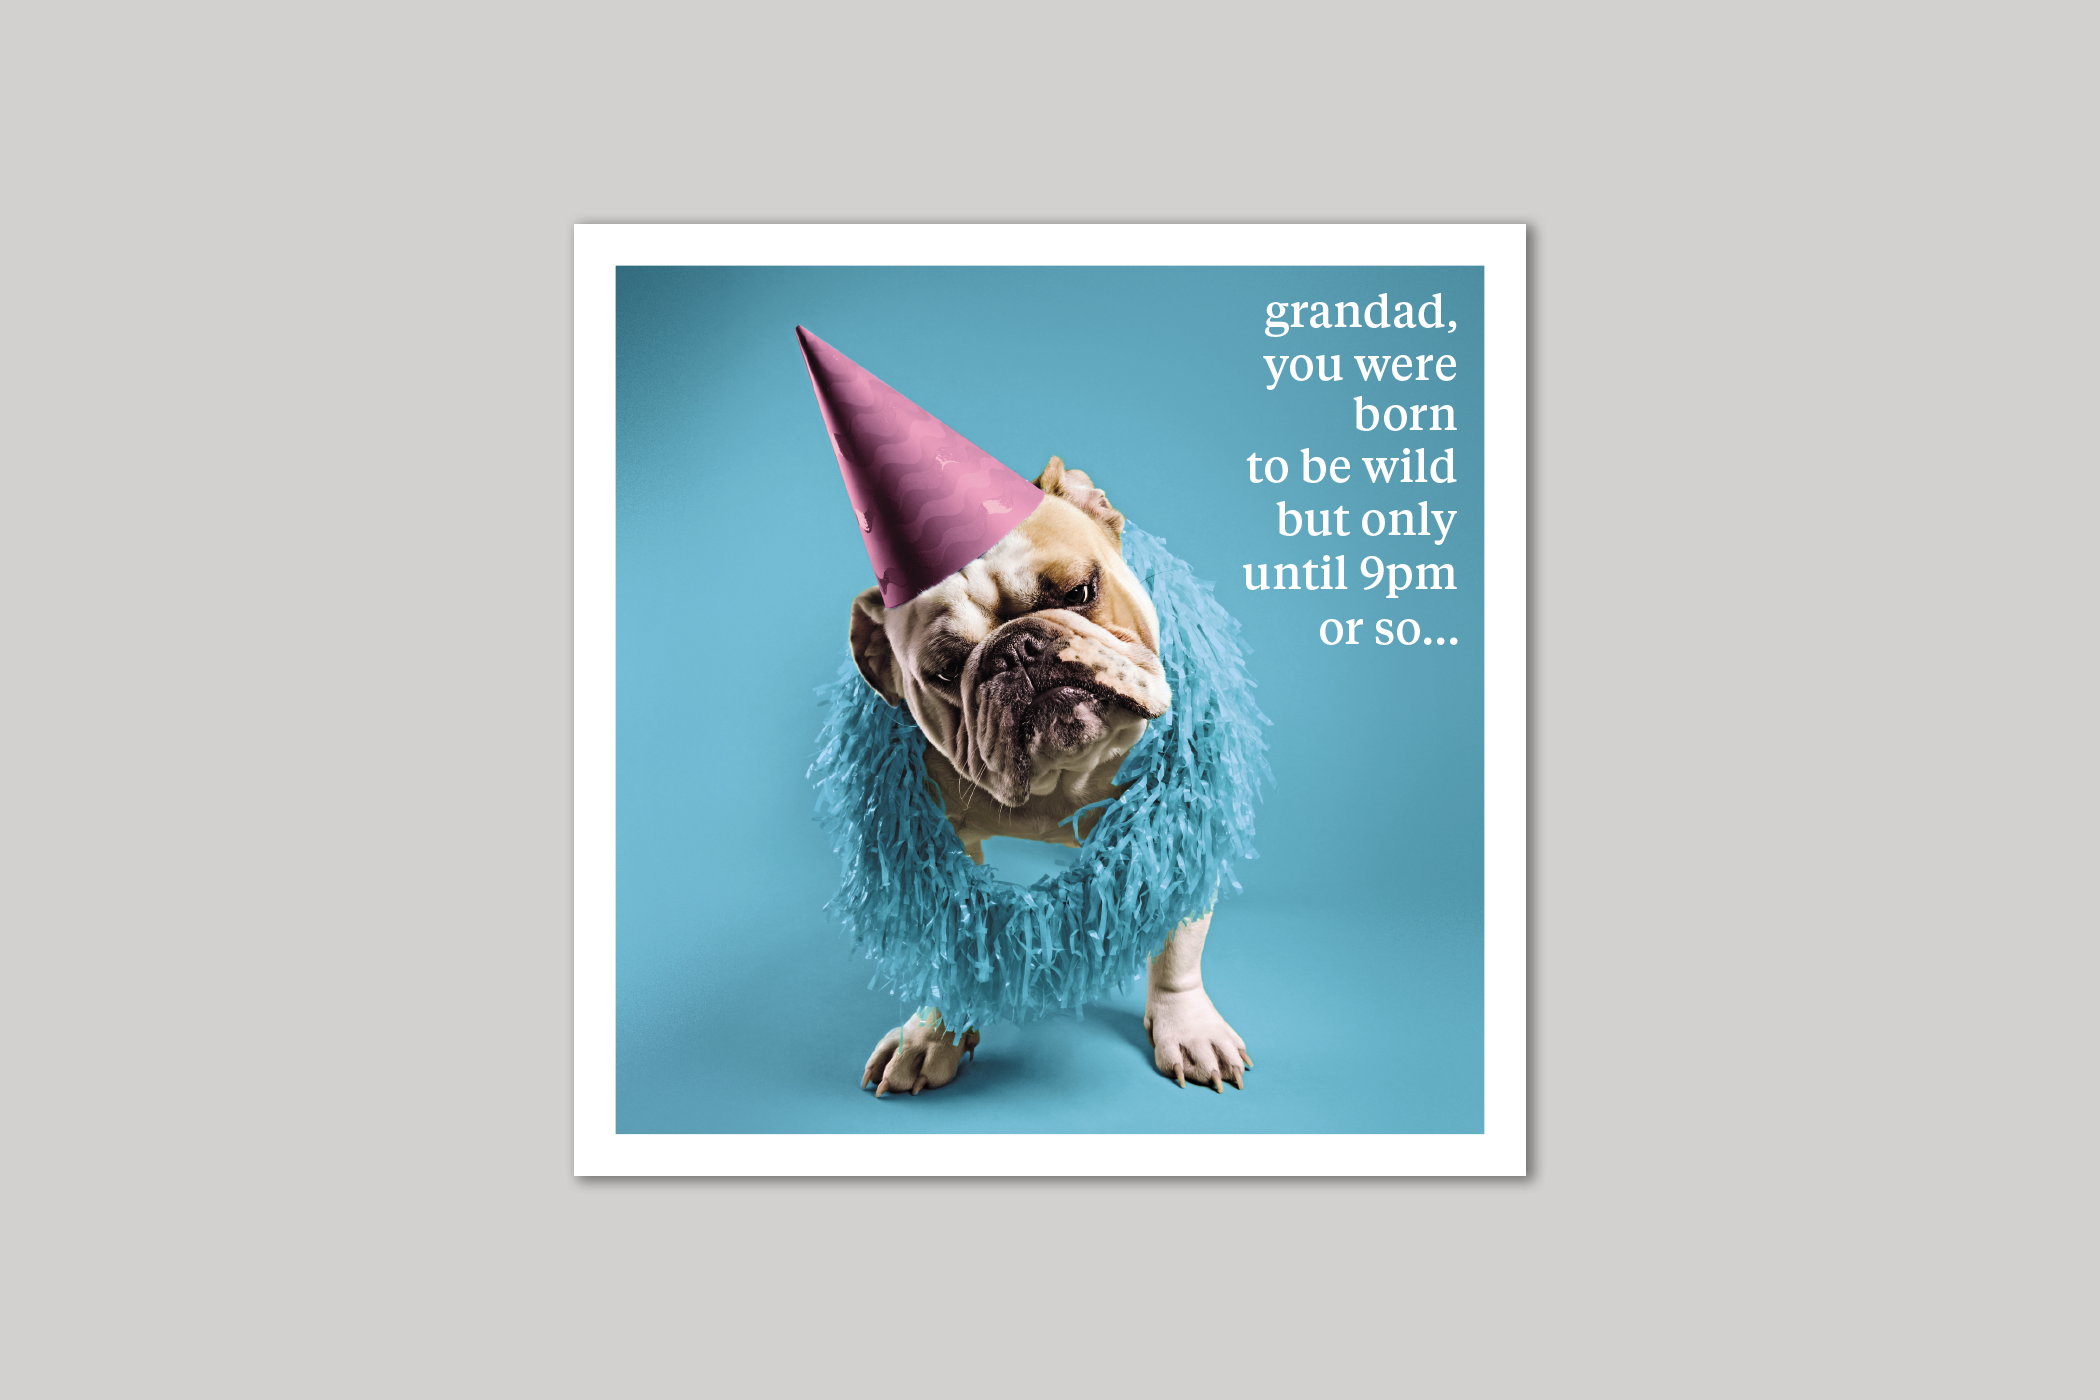 Born to be Wild grandad card quirky animal portrait from Curious World range of greeting cards by Icon.